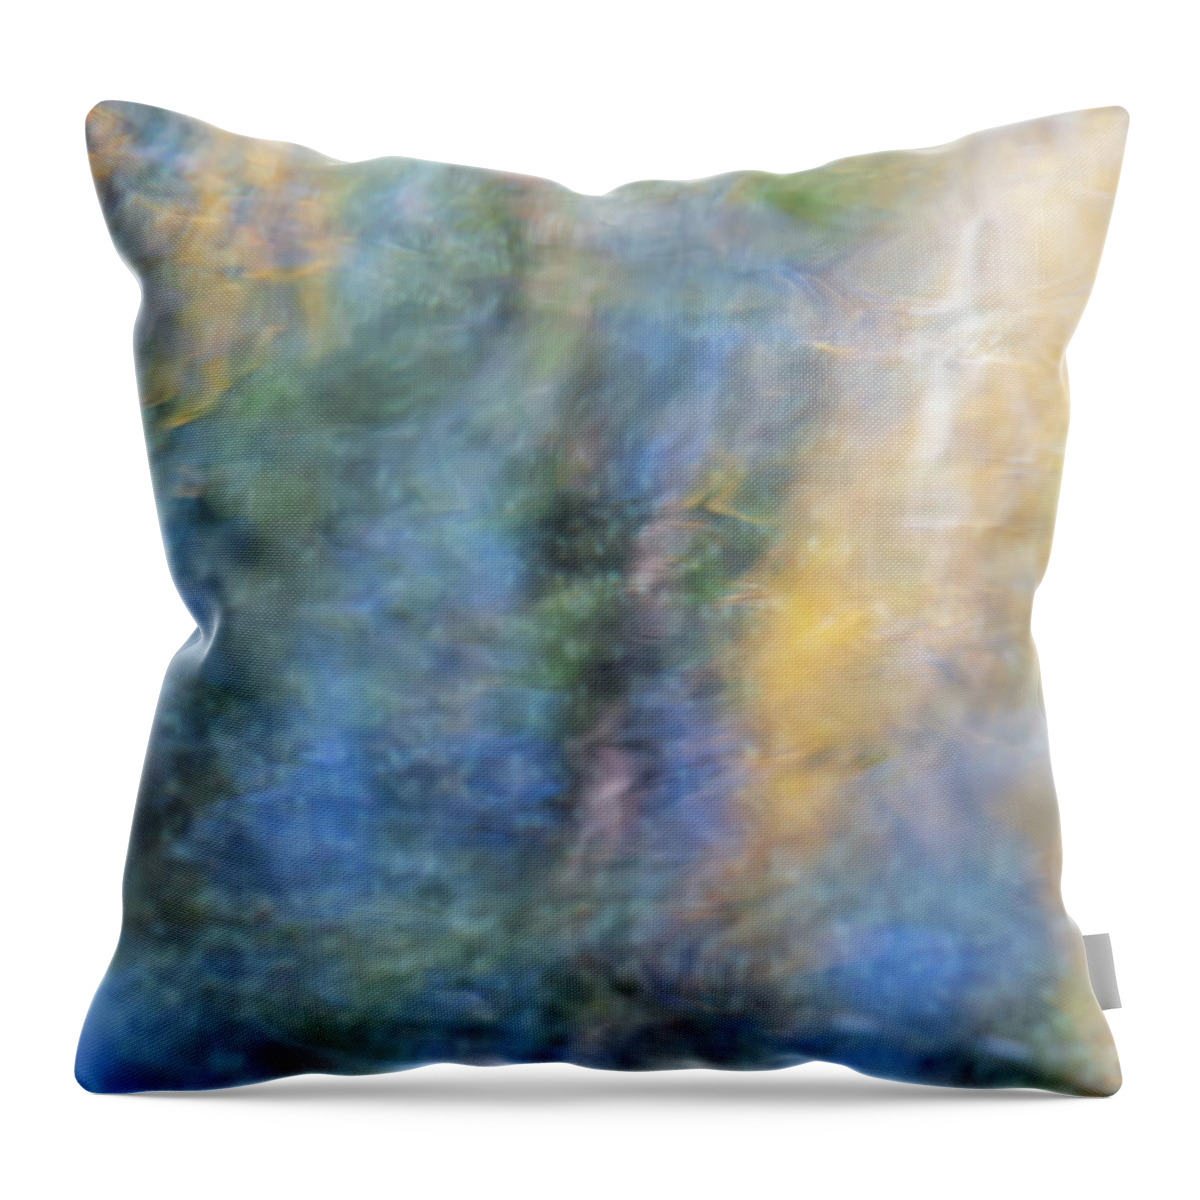 Yosemite Throw Pillow featuring the photograph Yosemite Reflections 3 by Larry Marshall